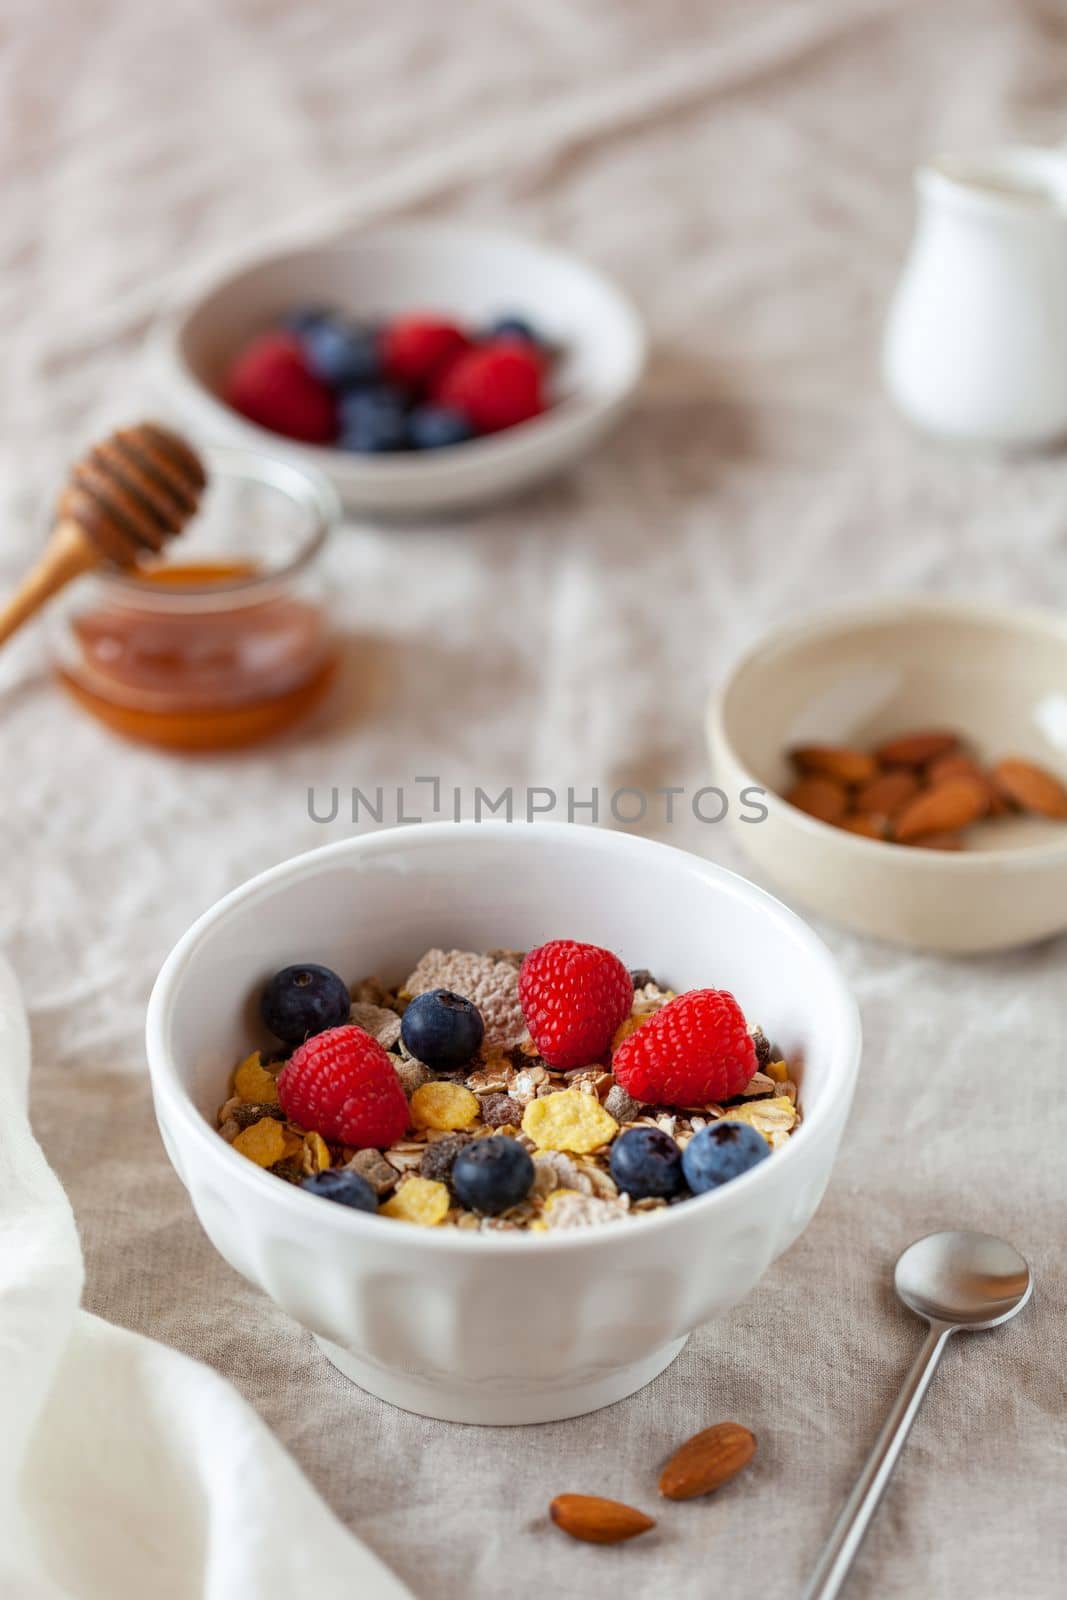 oat flakes breakfast portion with raspberries, blueberries and honey, on the table cloth